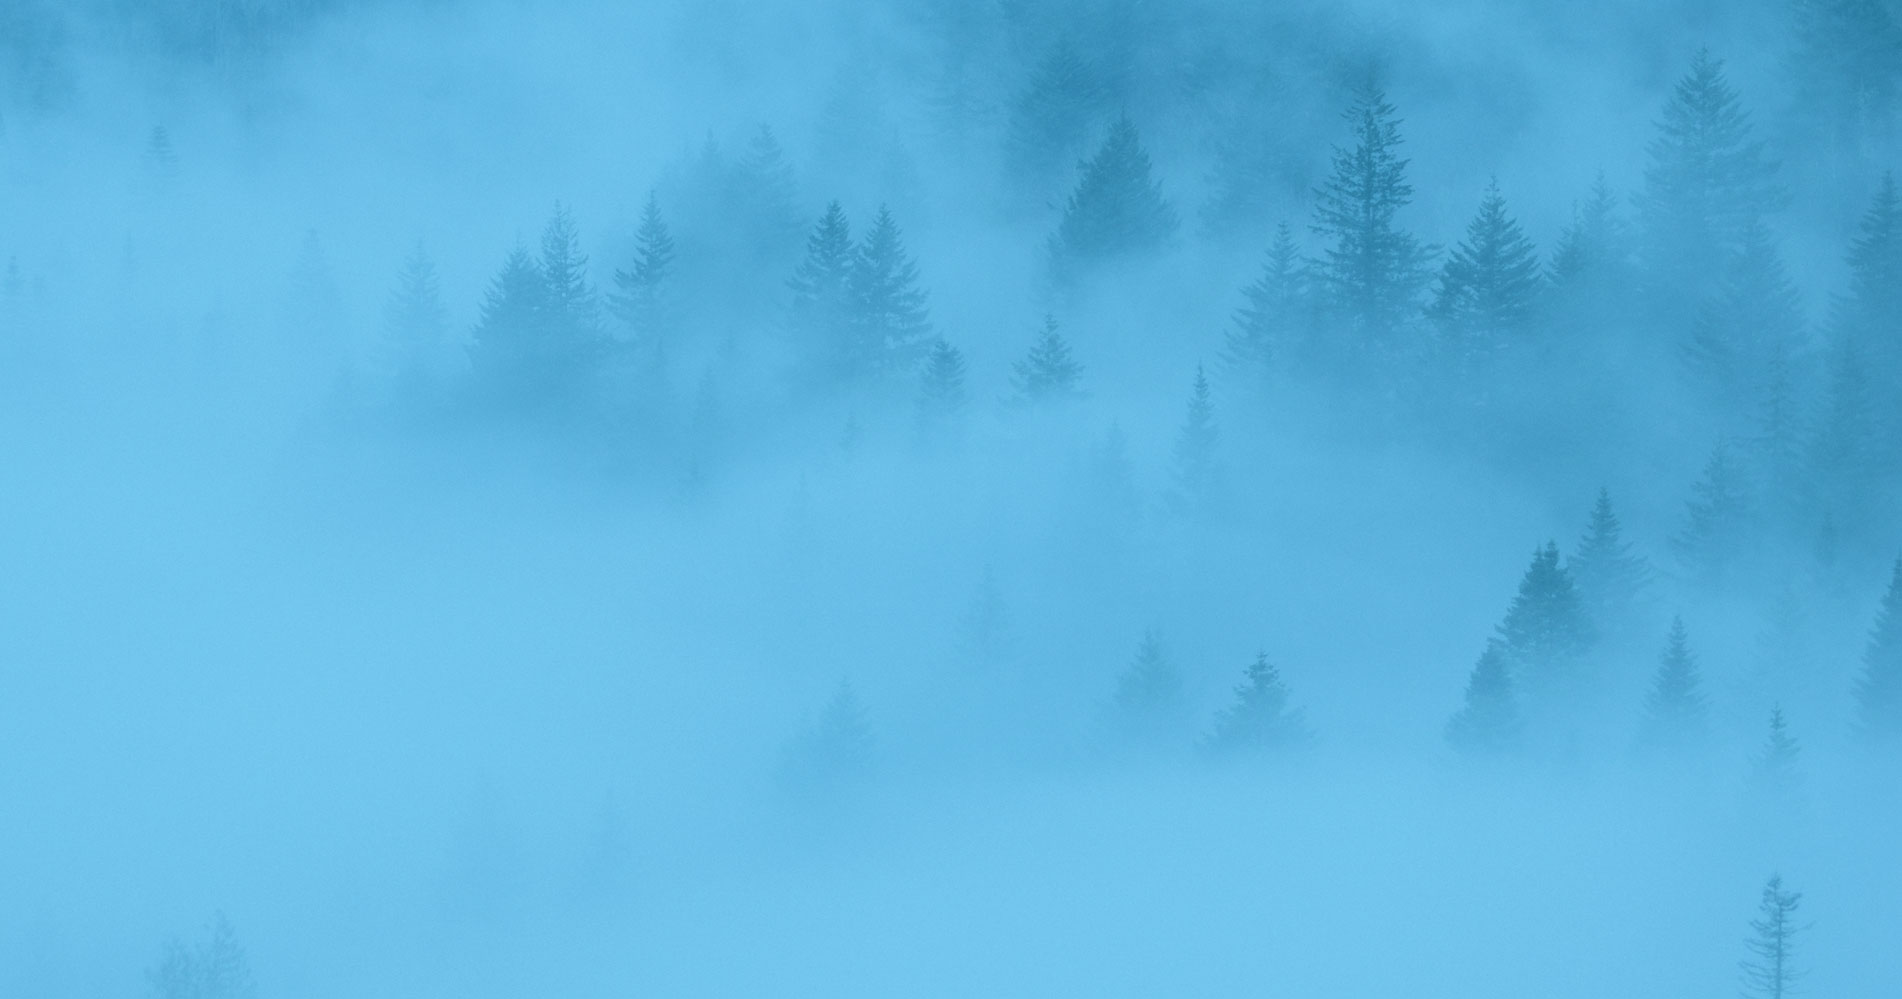 Mountain Trees In The Fog